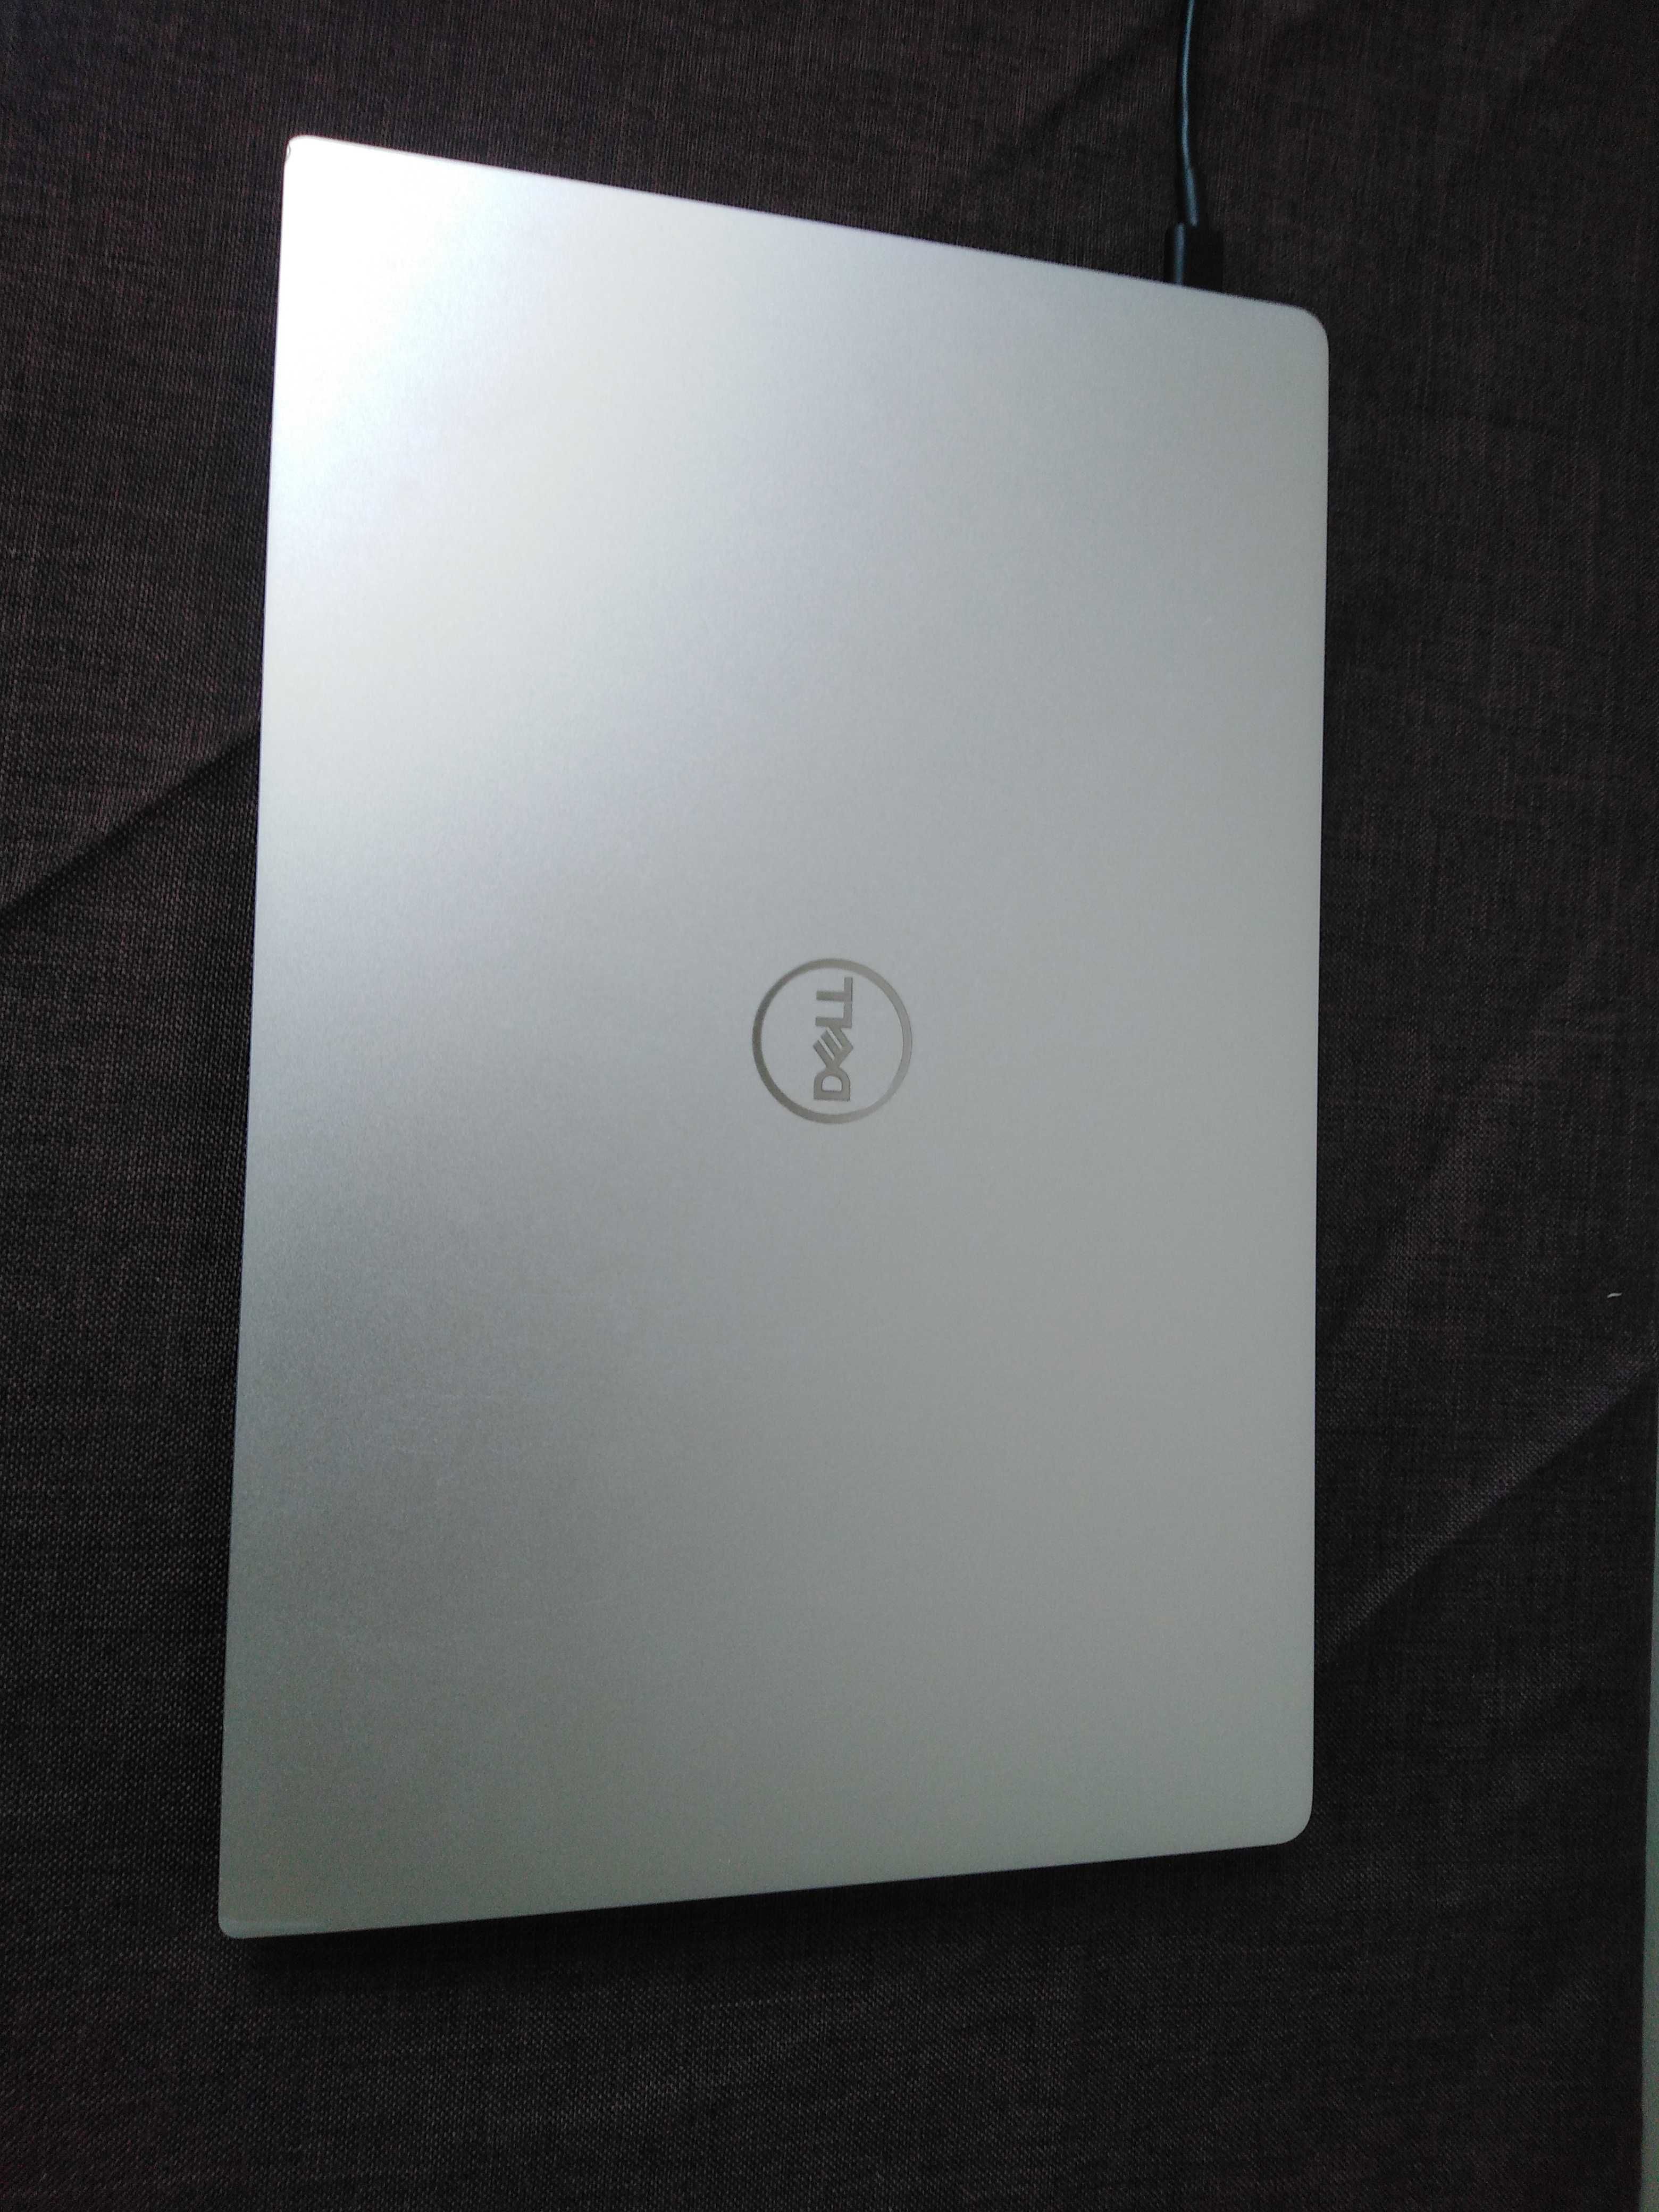 Dell XPS 13 9730 4K Touch i7 16 RAM